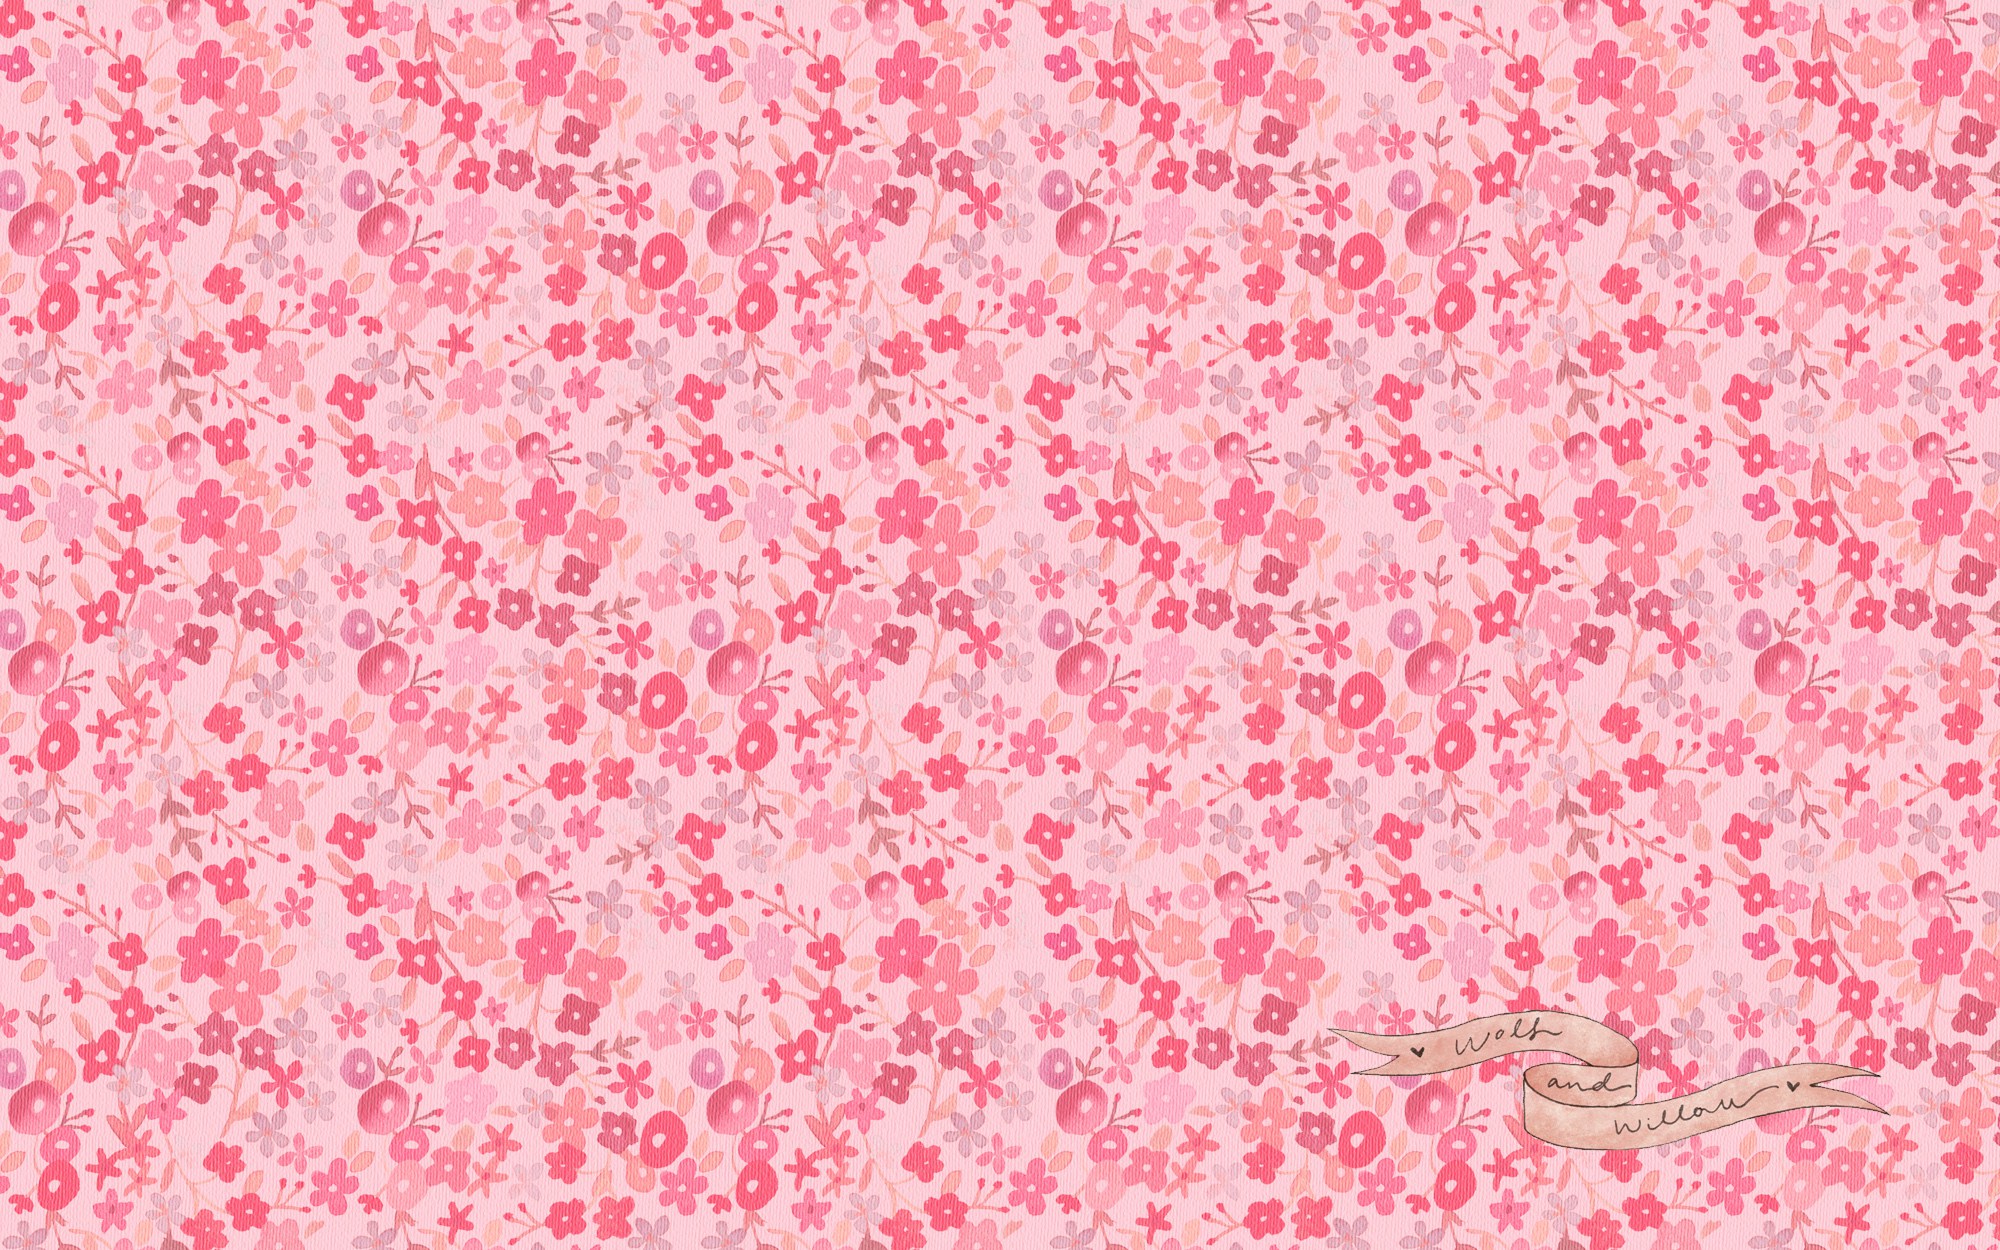 Girly computer backgrounds